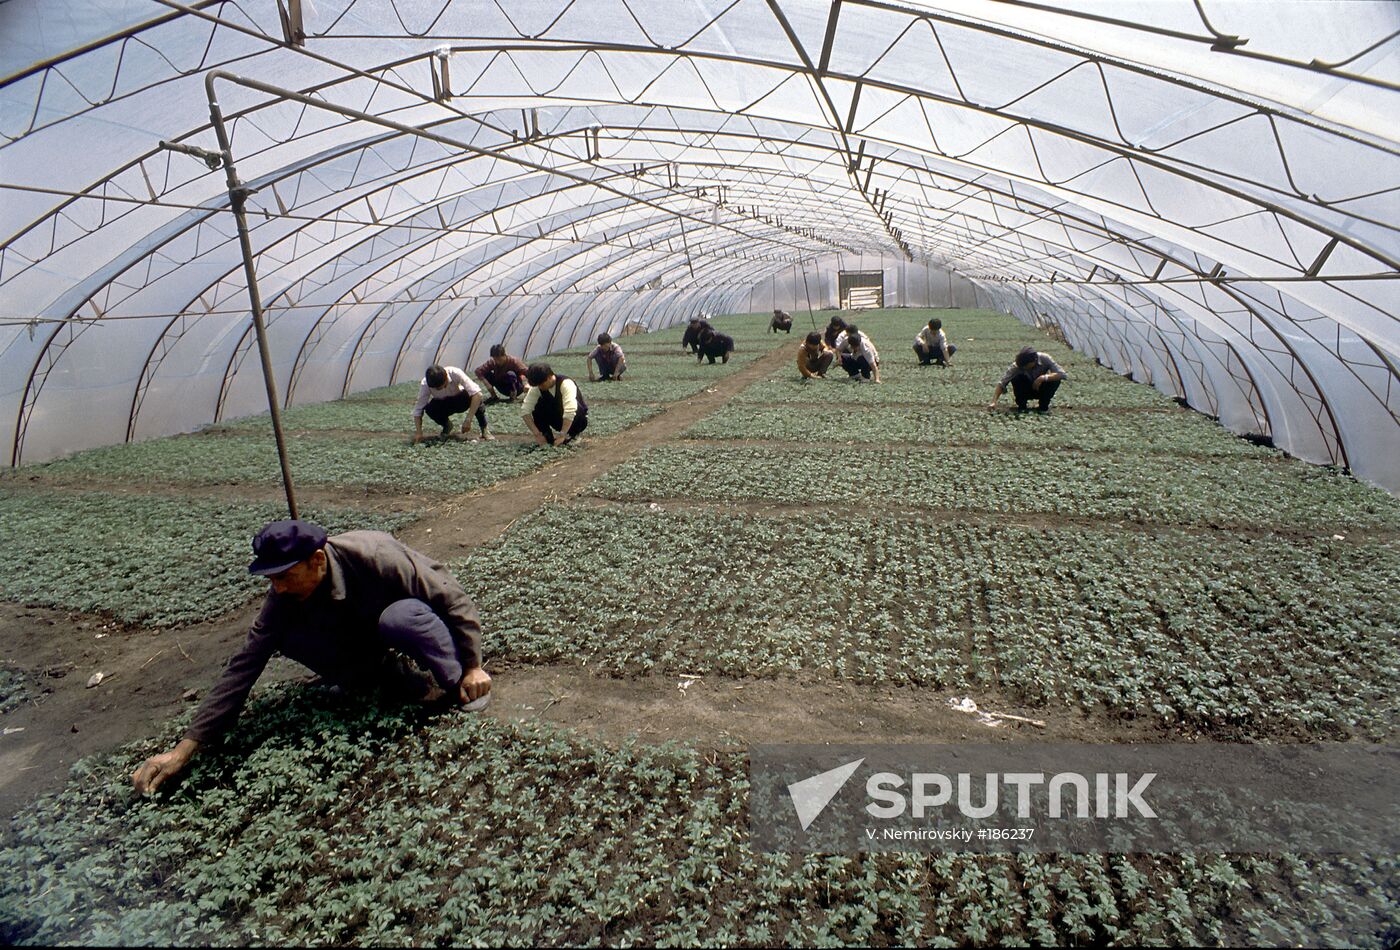 Primorye Territory farming vegetables Chinese nationals